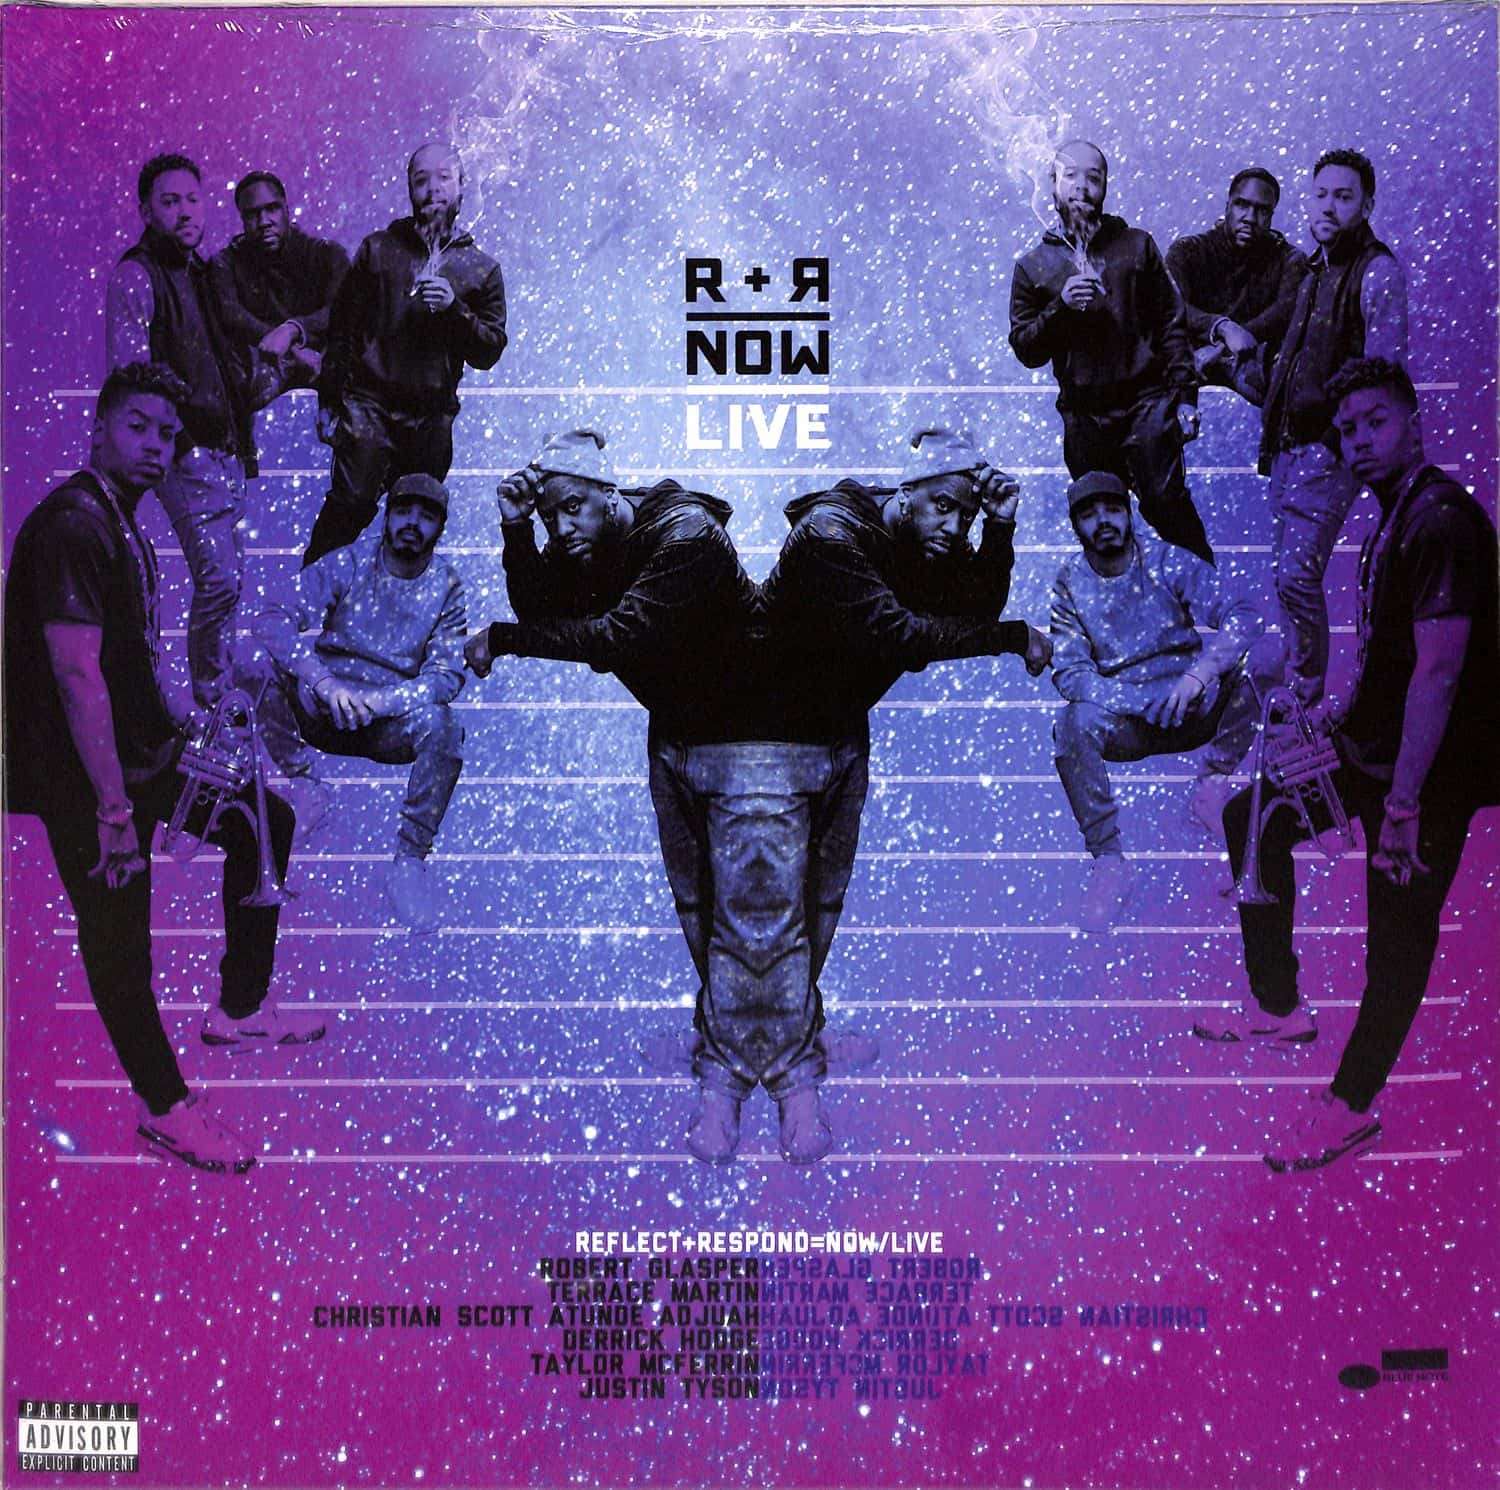 R+R=Now - R+R=NOW LIVE 